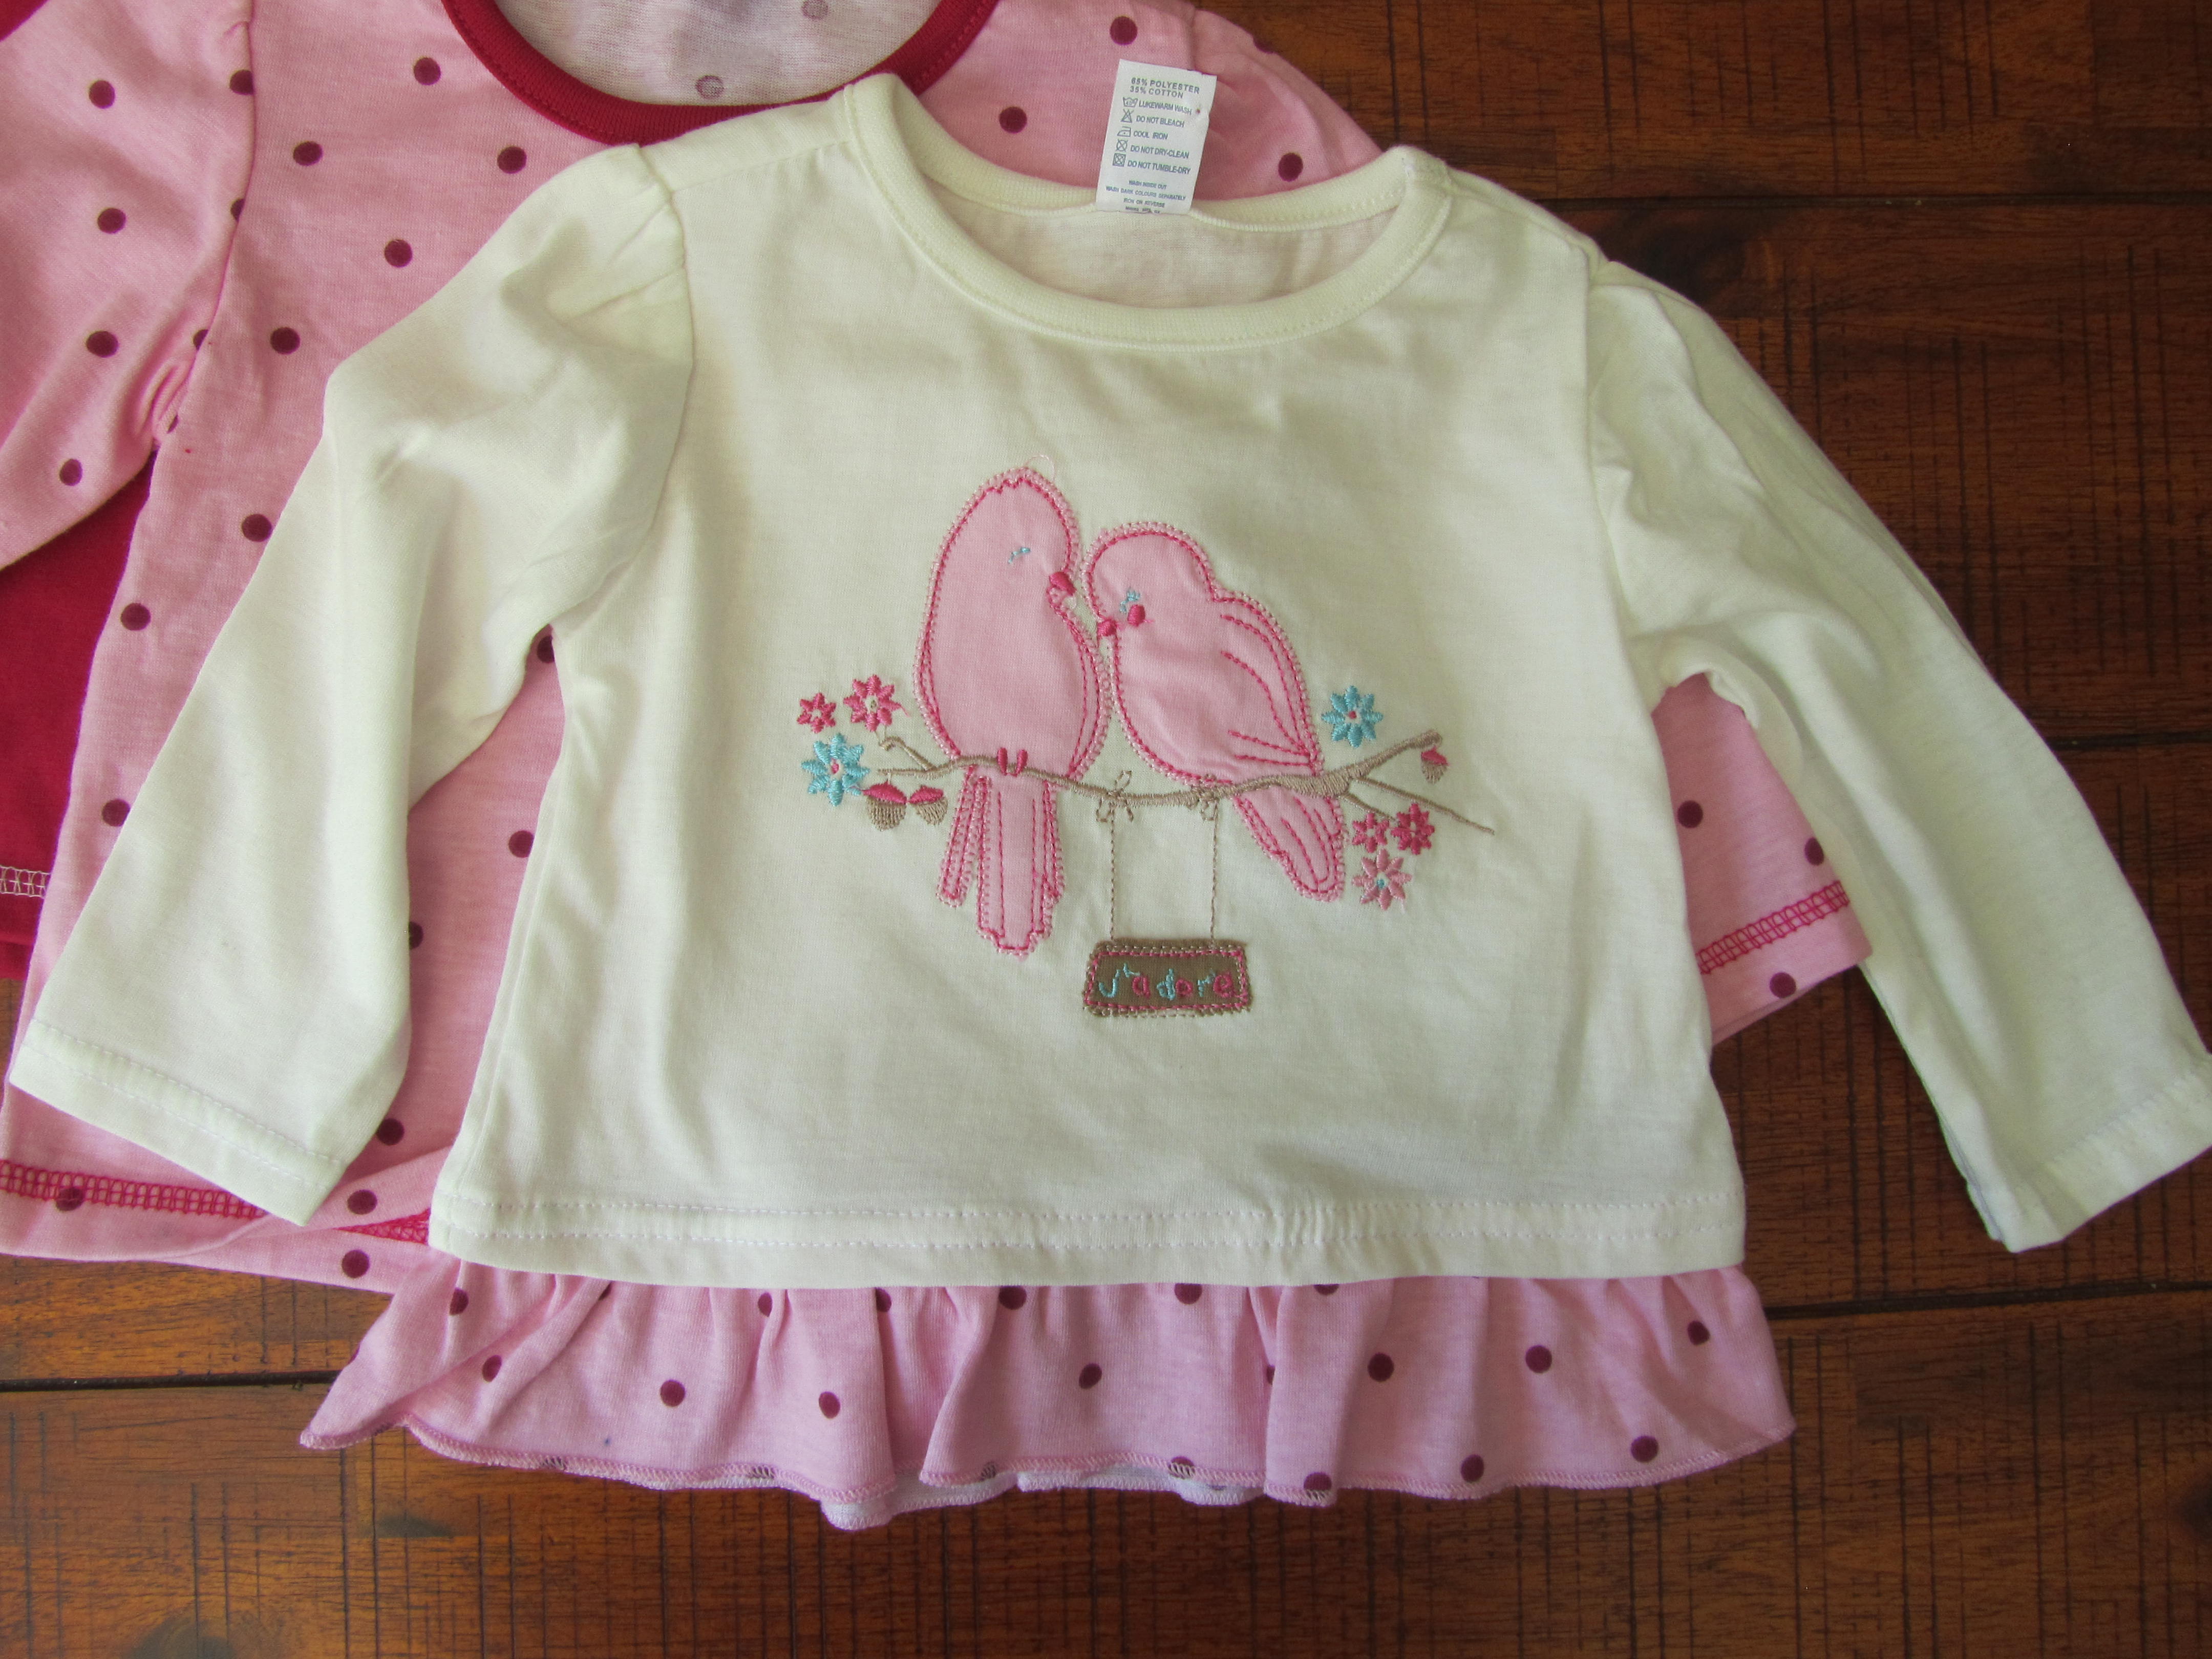 ACKERMANS has got a new baby's and children's clothing range called L